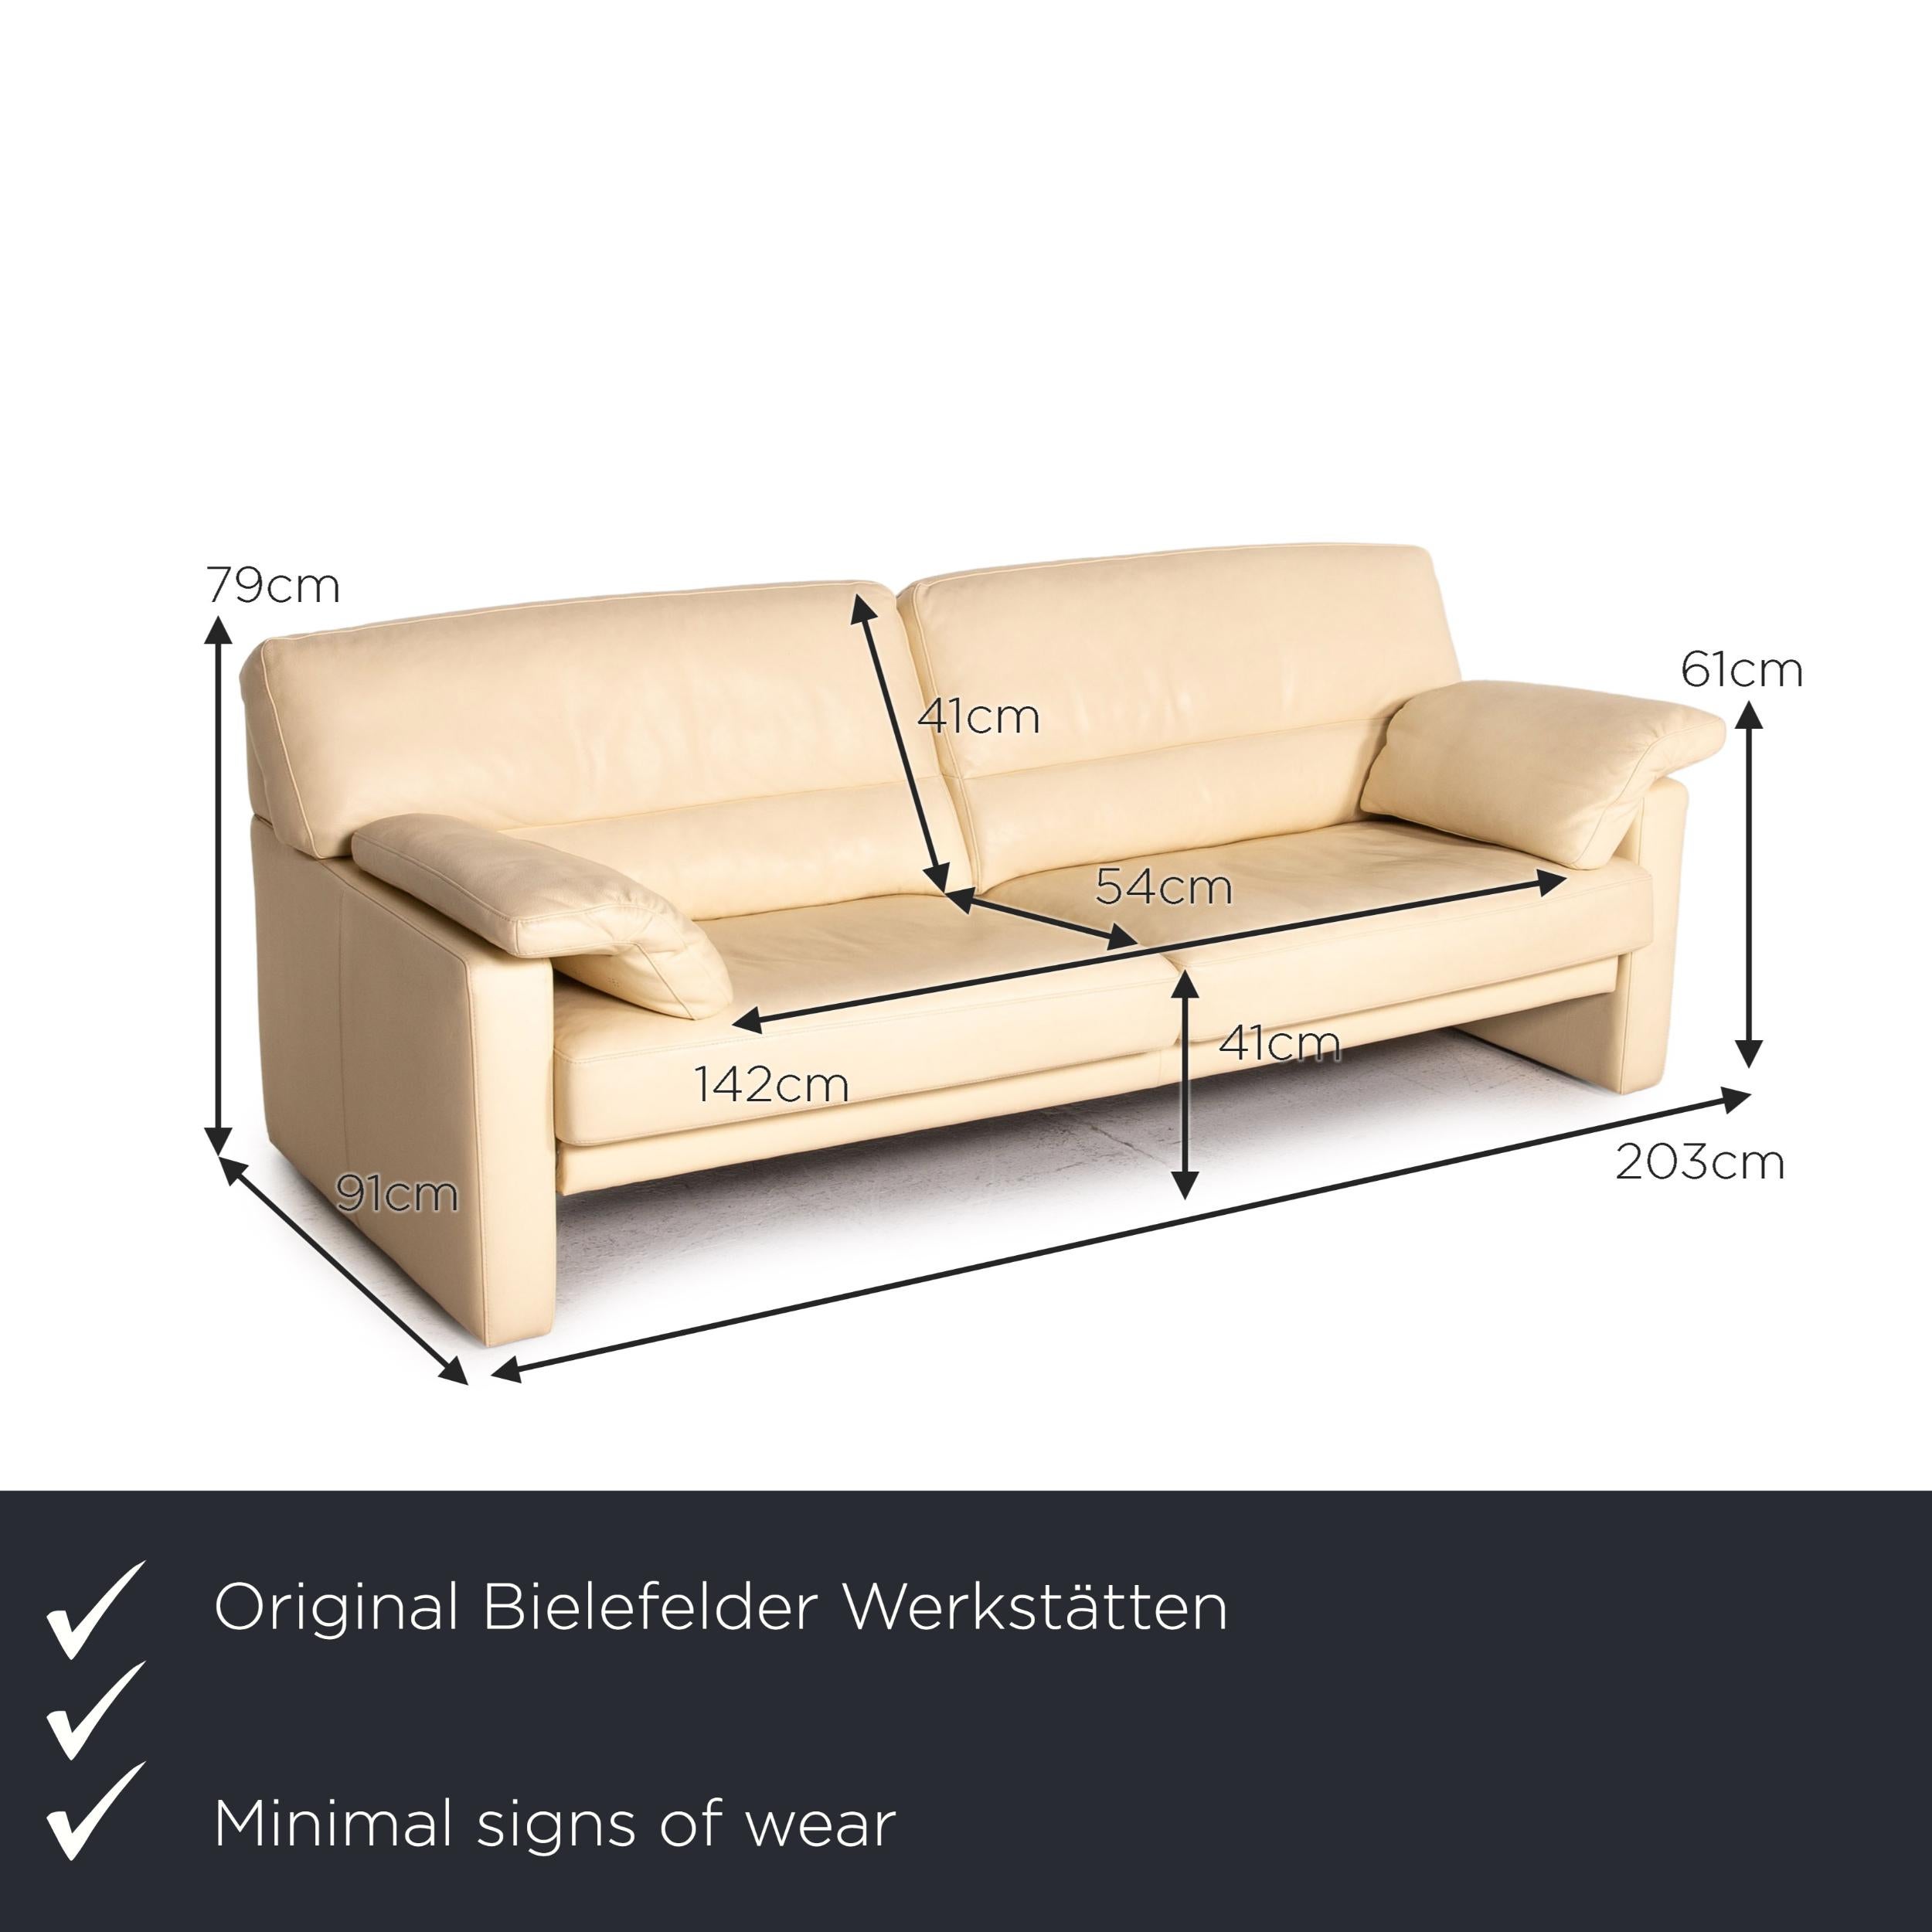 We present to you a Bielefelder Werkstätten leather sofa cream three-seater couch.
 

 Product measurements in centimeters:
 

Depth: 91
Width: 203
Height: 79
Seat height: 41
Rest height: 61
Seat depth: 54
Seat width: 142
Back height: